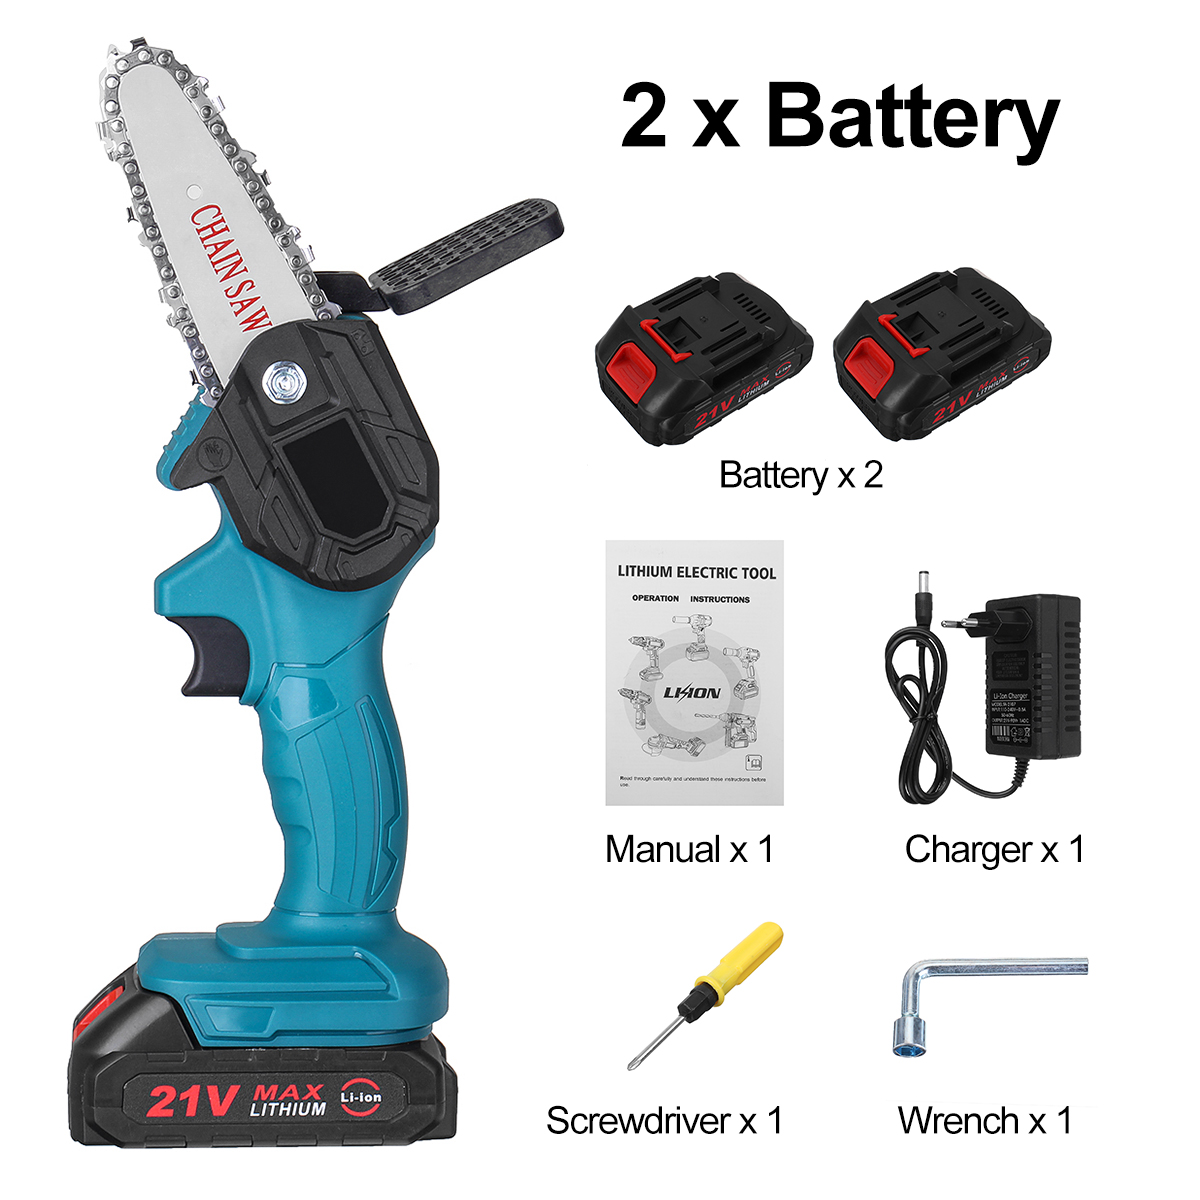 4-Inch-21V-Cordless-Electric-Chain-Saw-W-01pc2pcs-Batteries-For-Tree-Branch-Wood-Cutting-Tool-1804698-13